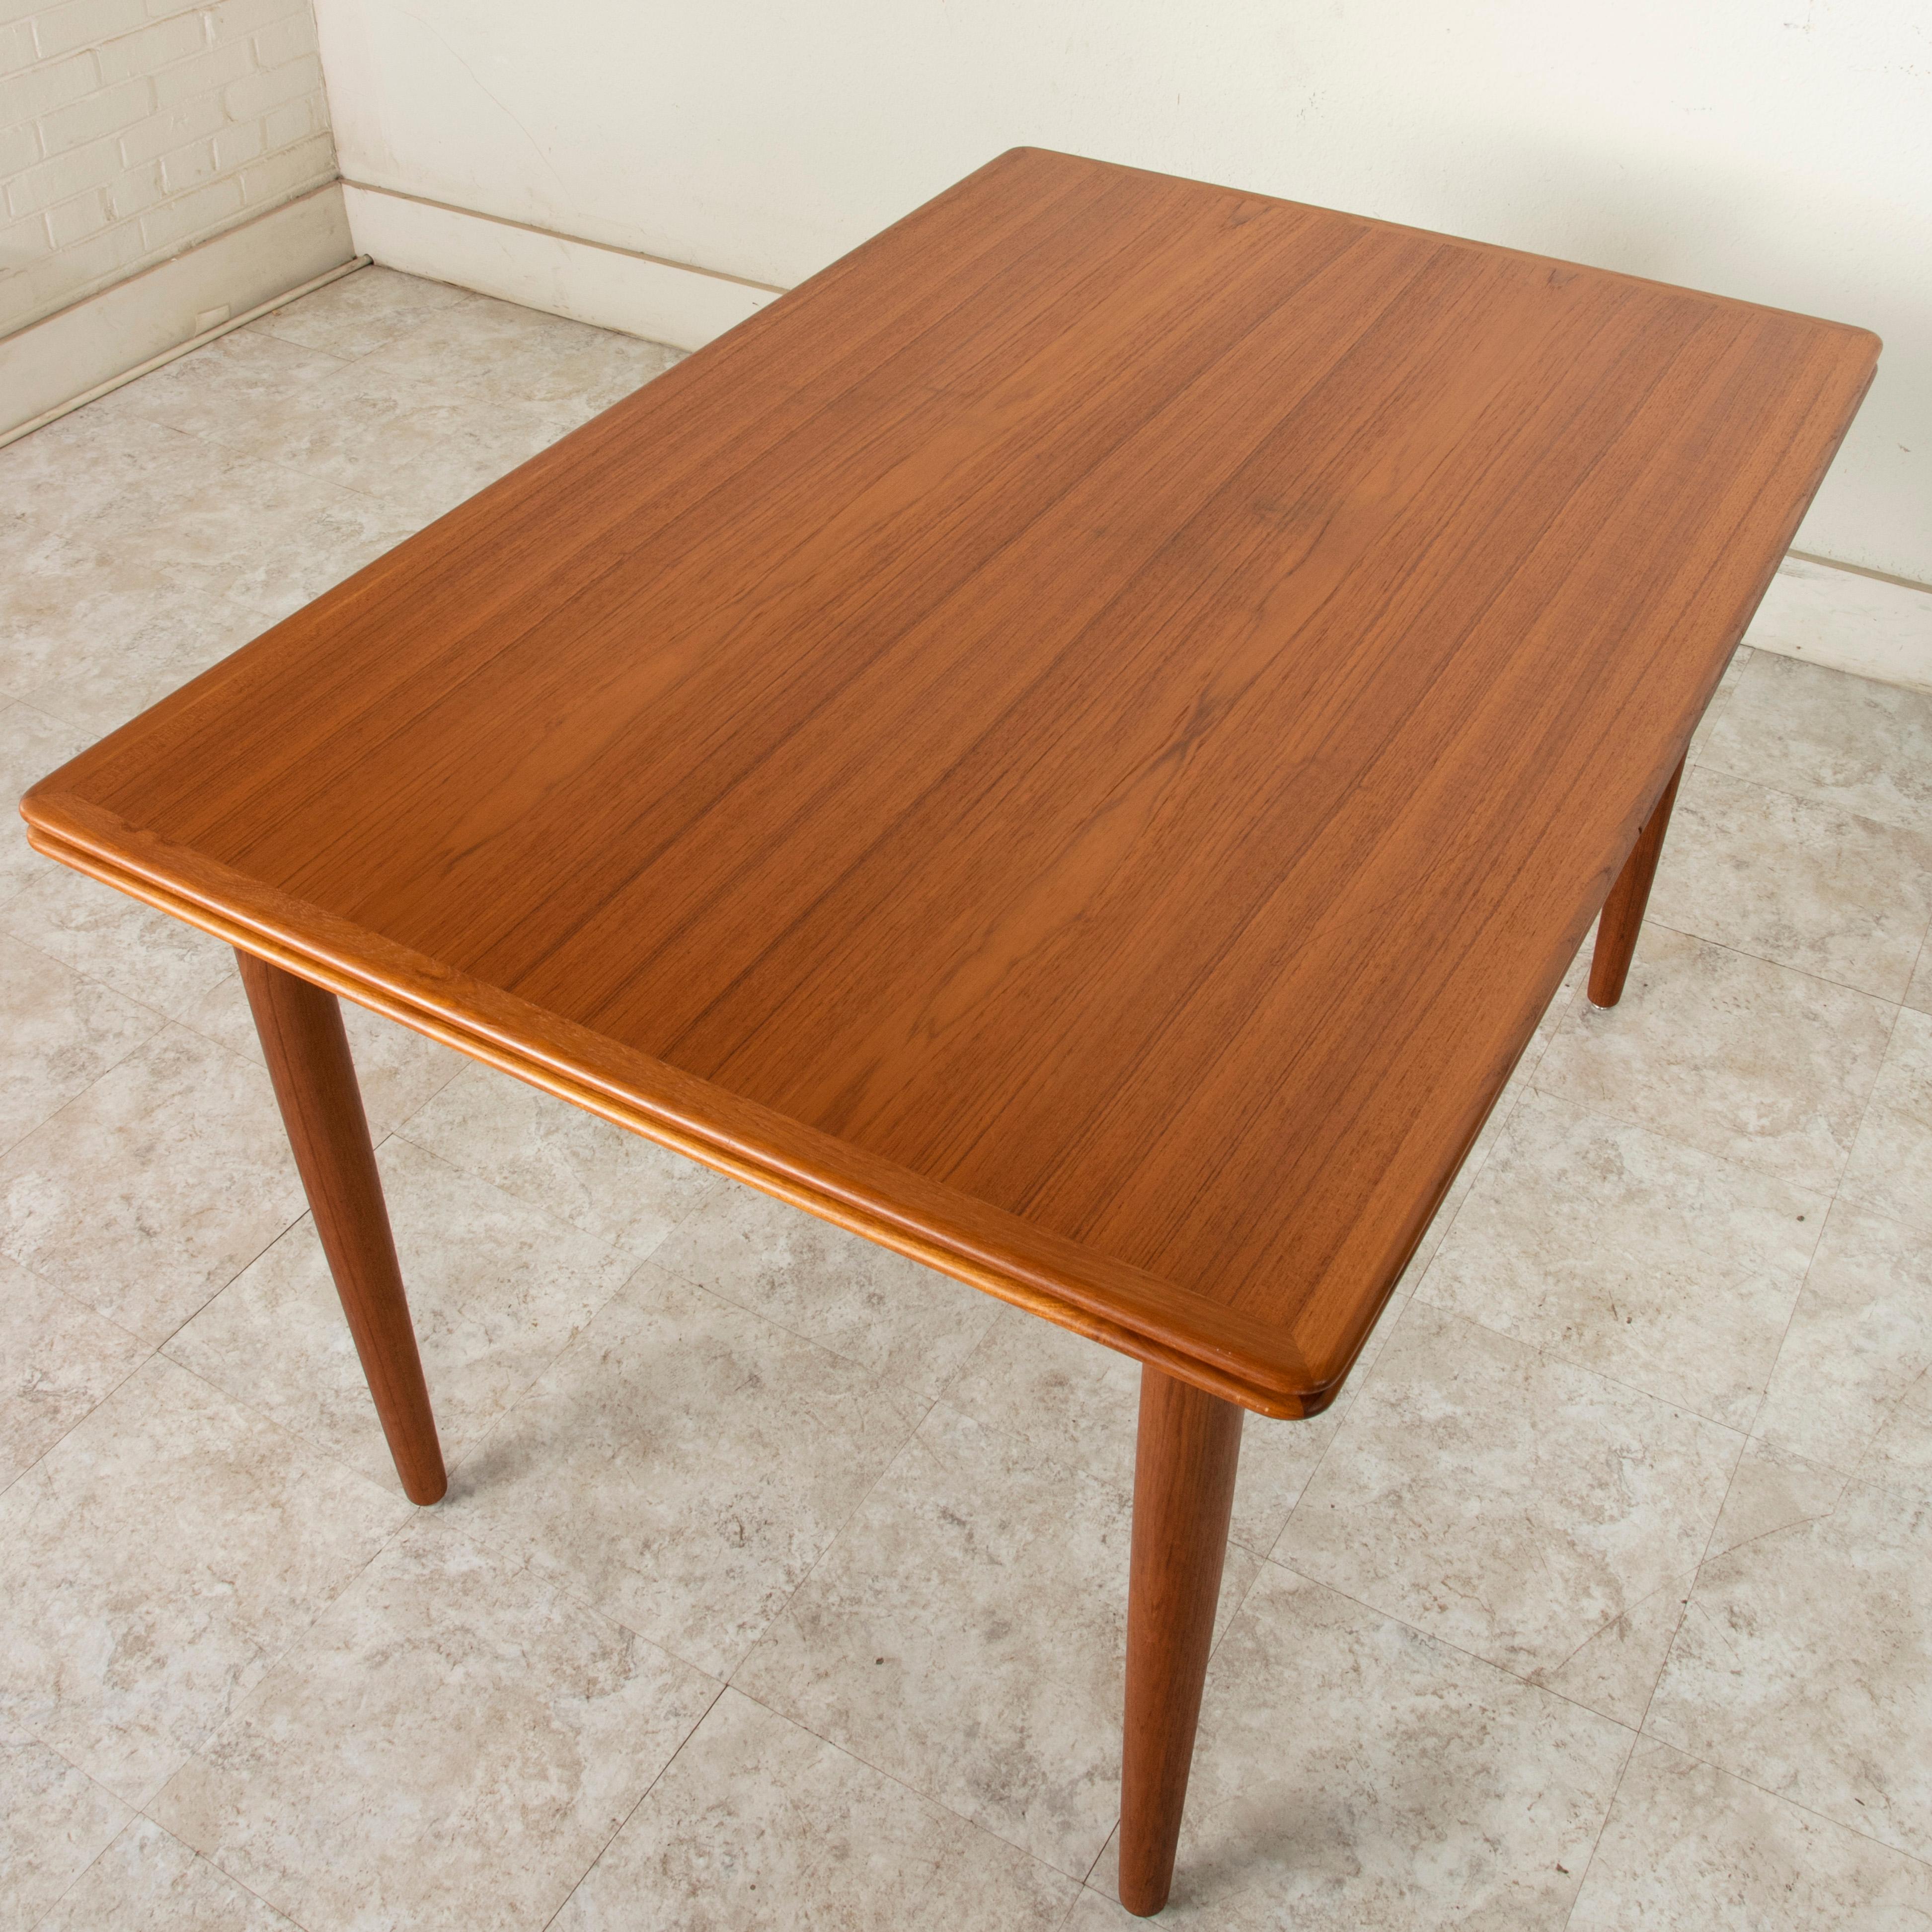 20th Century Midcentury Danish Modern Teak Dining Table with Draw Leaves